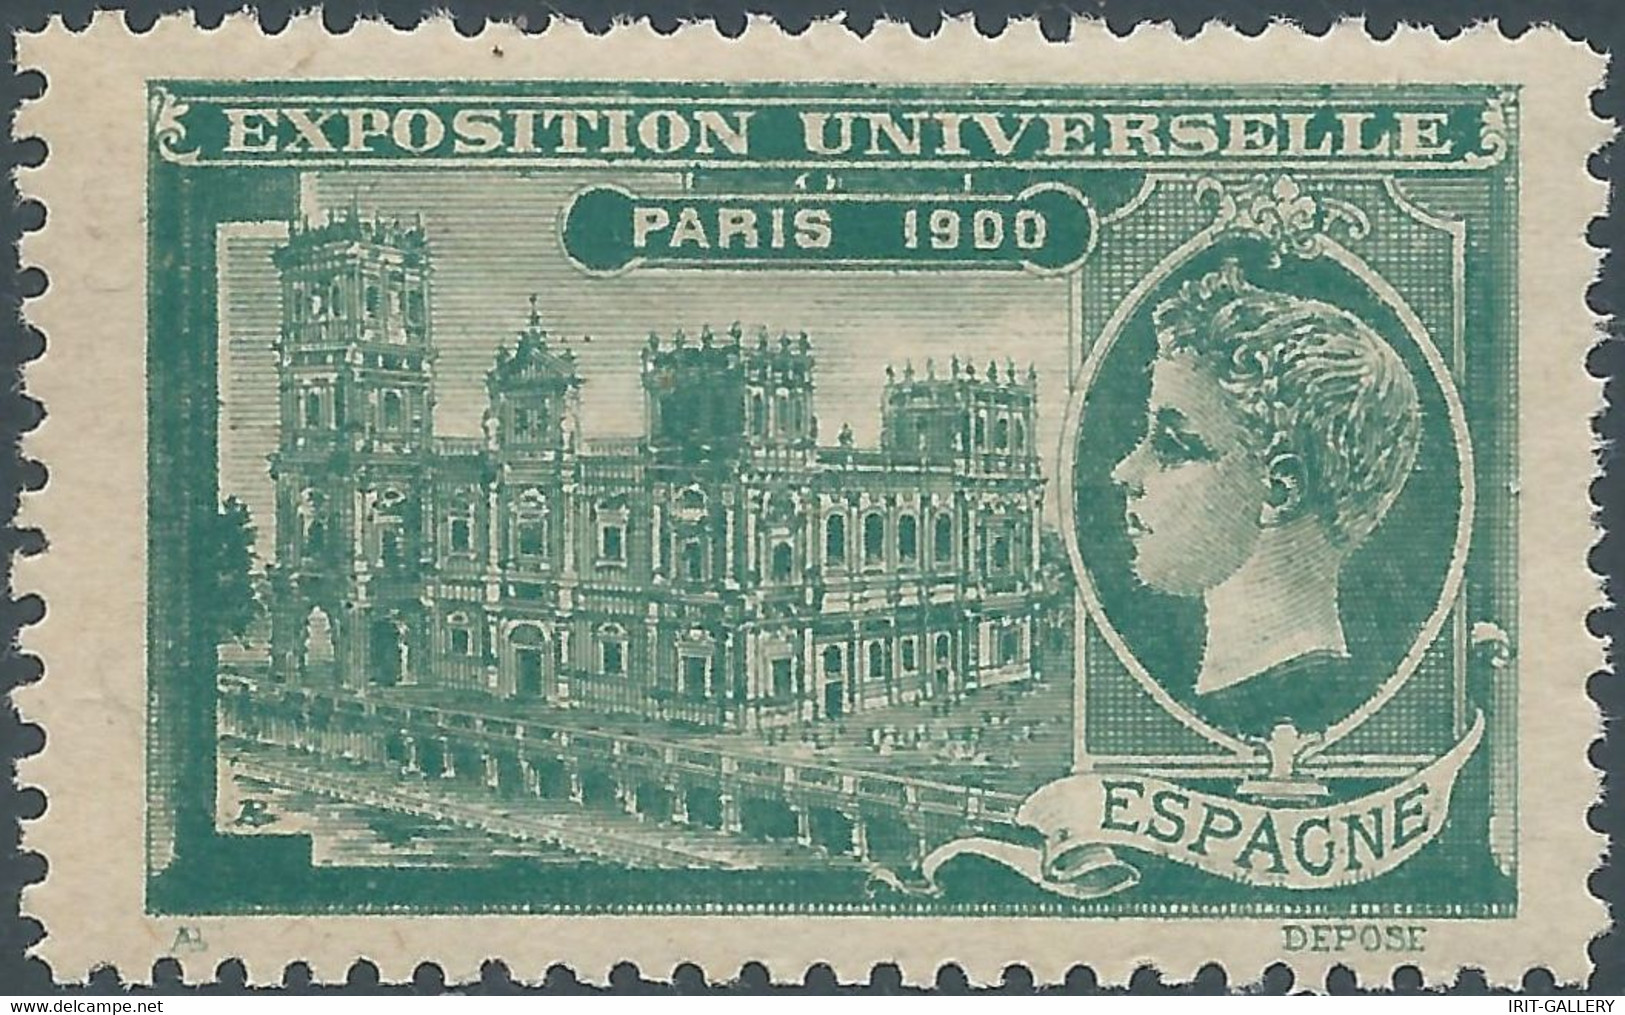 France,Paris 1900 UNIVERSAL EXHIBITION OF Spagne - Spain ,Trace Of Hinged - 1900 – Pariis (France)